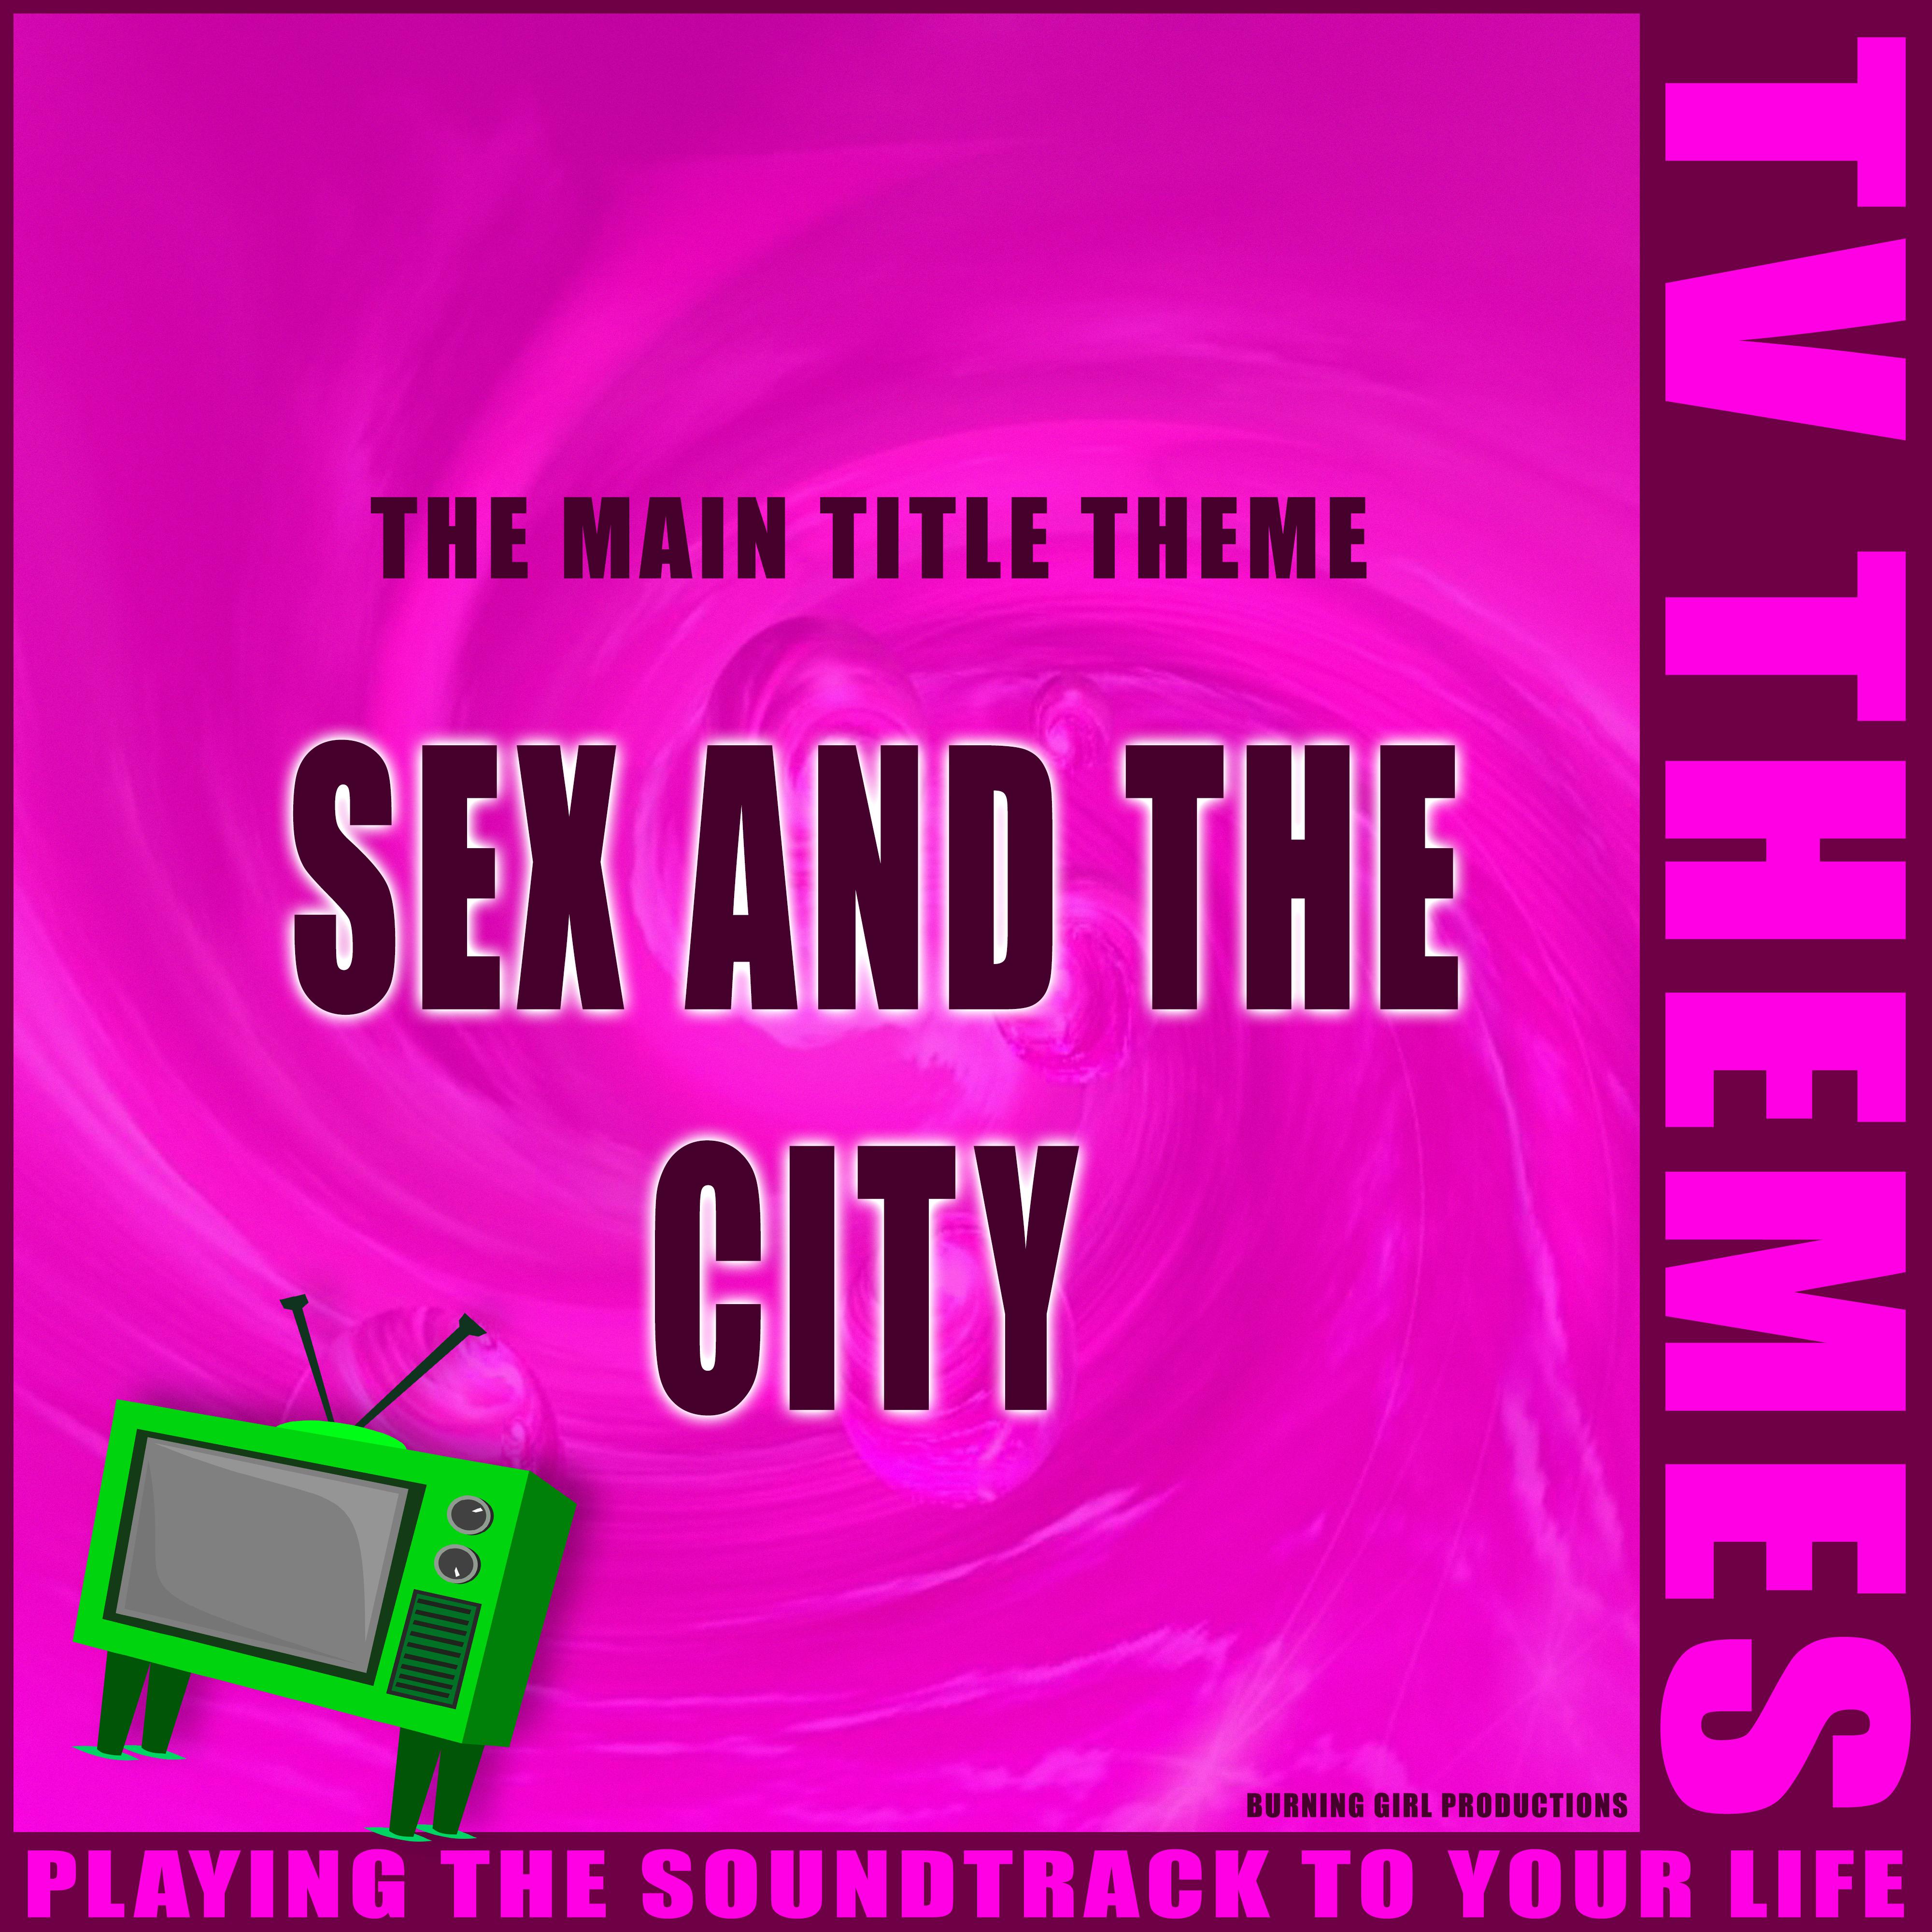 The Main Title Theme - *** and the City